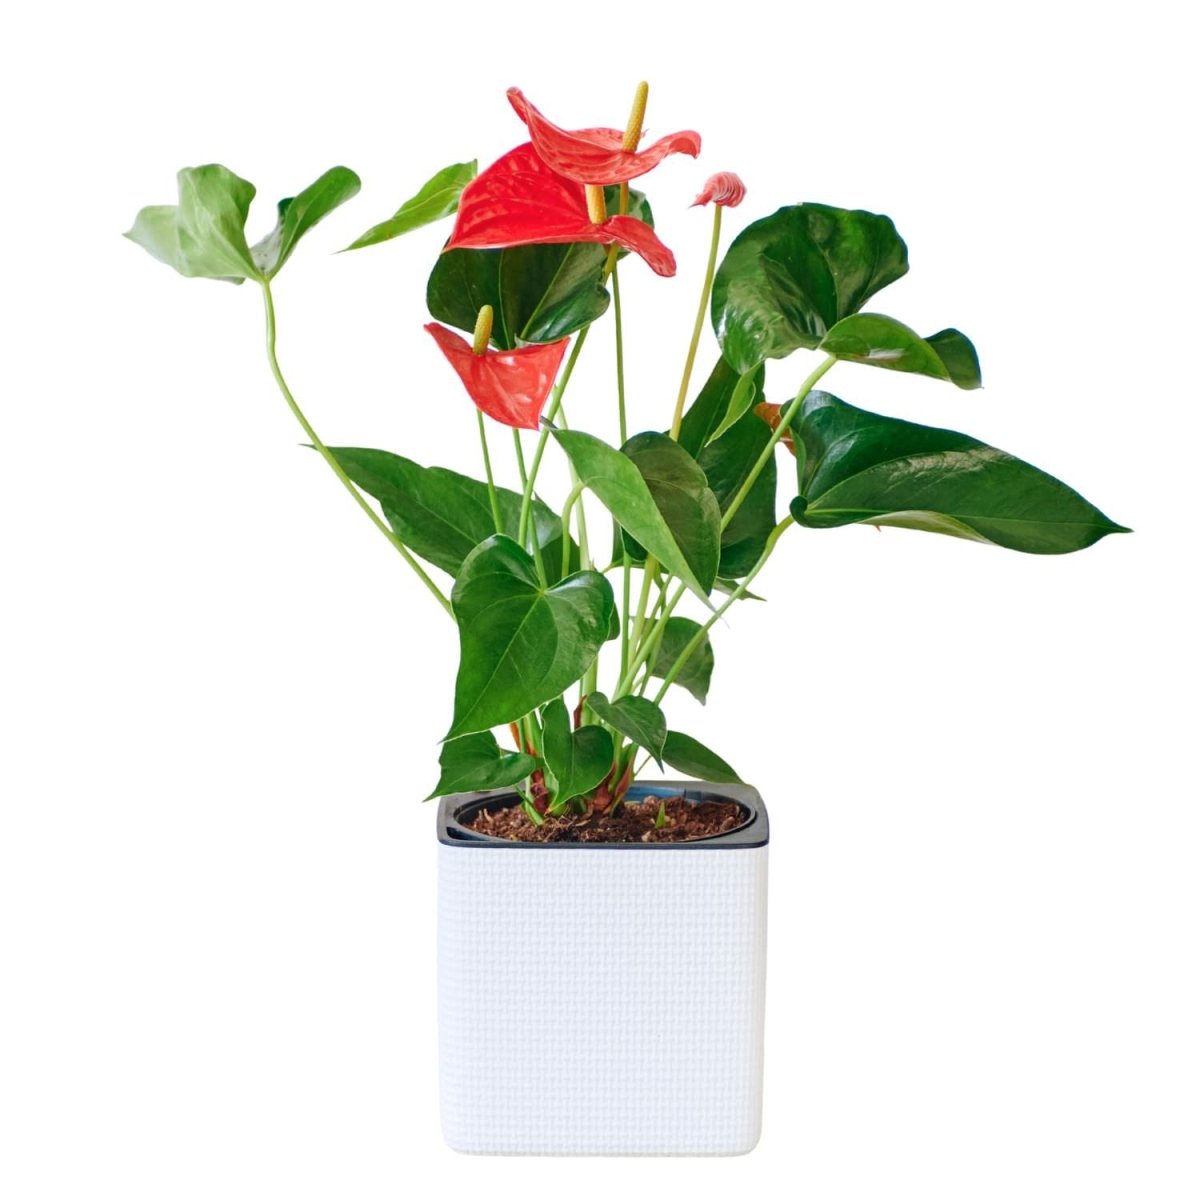 Anthurium Placed In Lechuza Cube 16 Planter - White - My City Plants